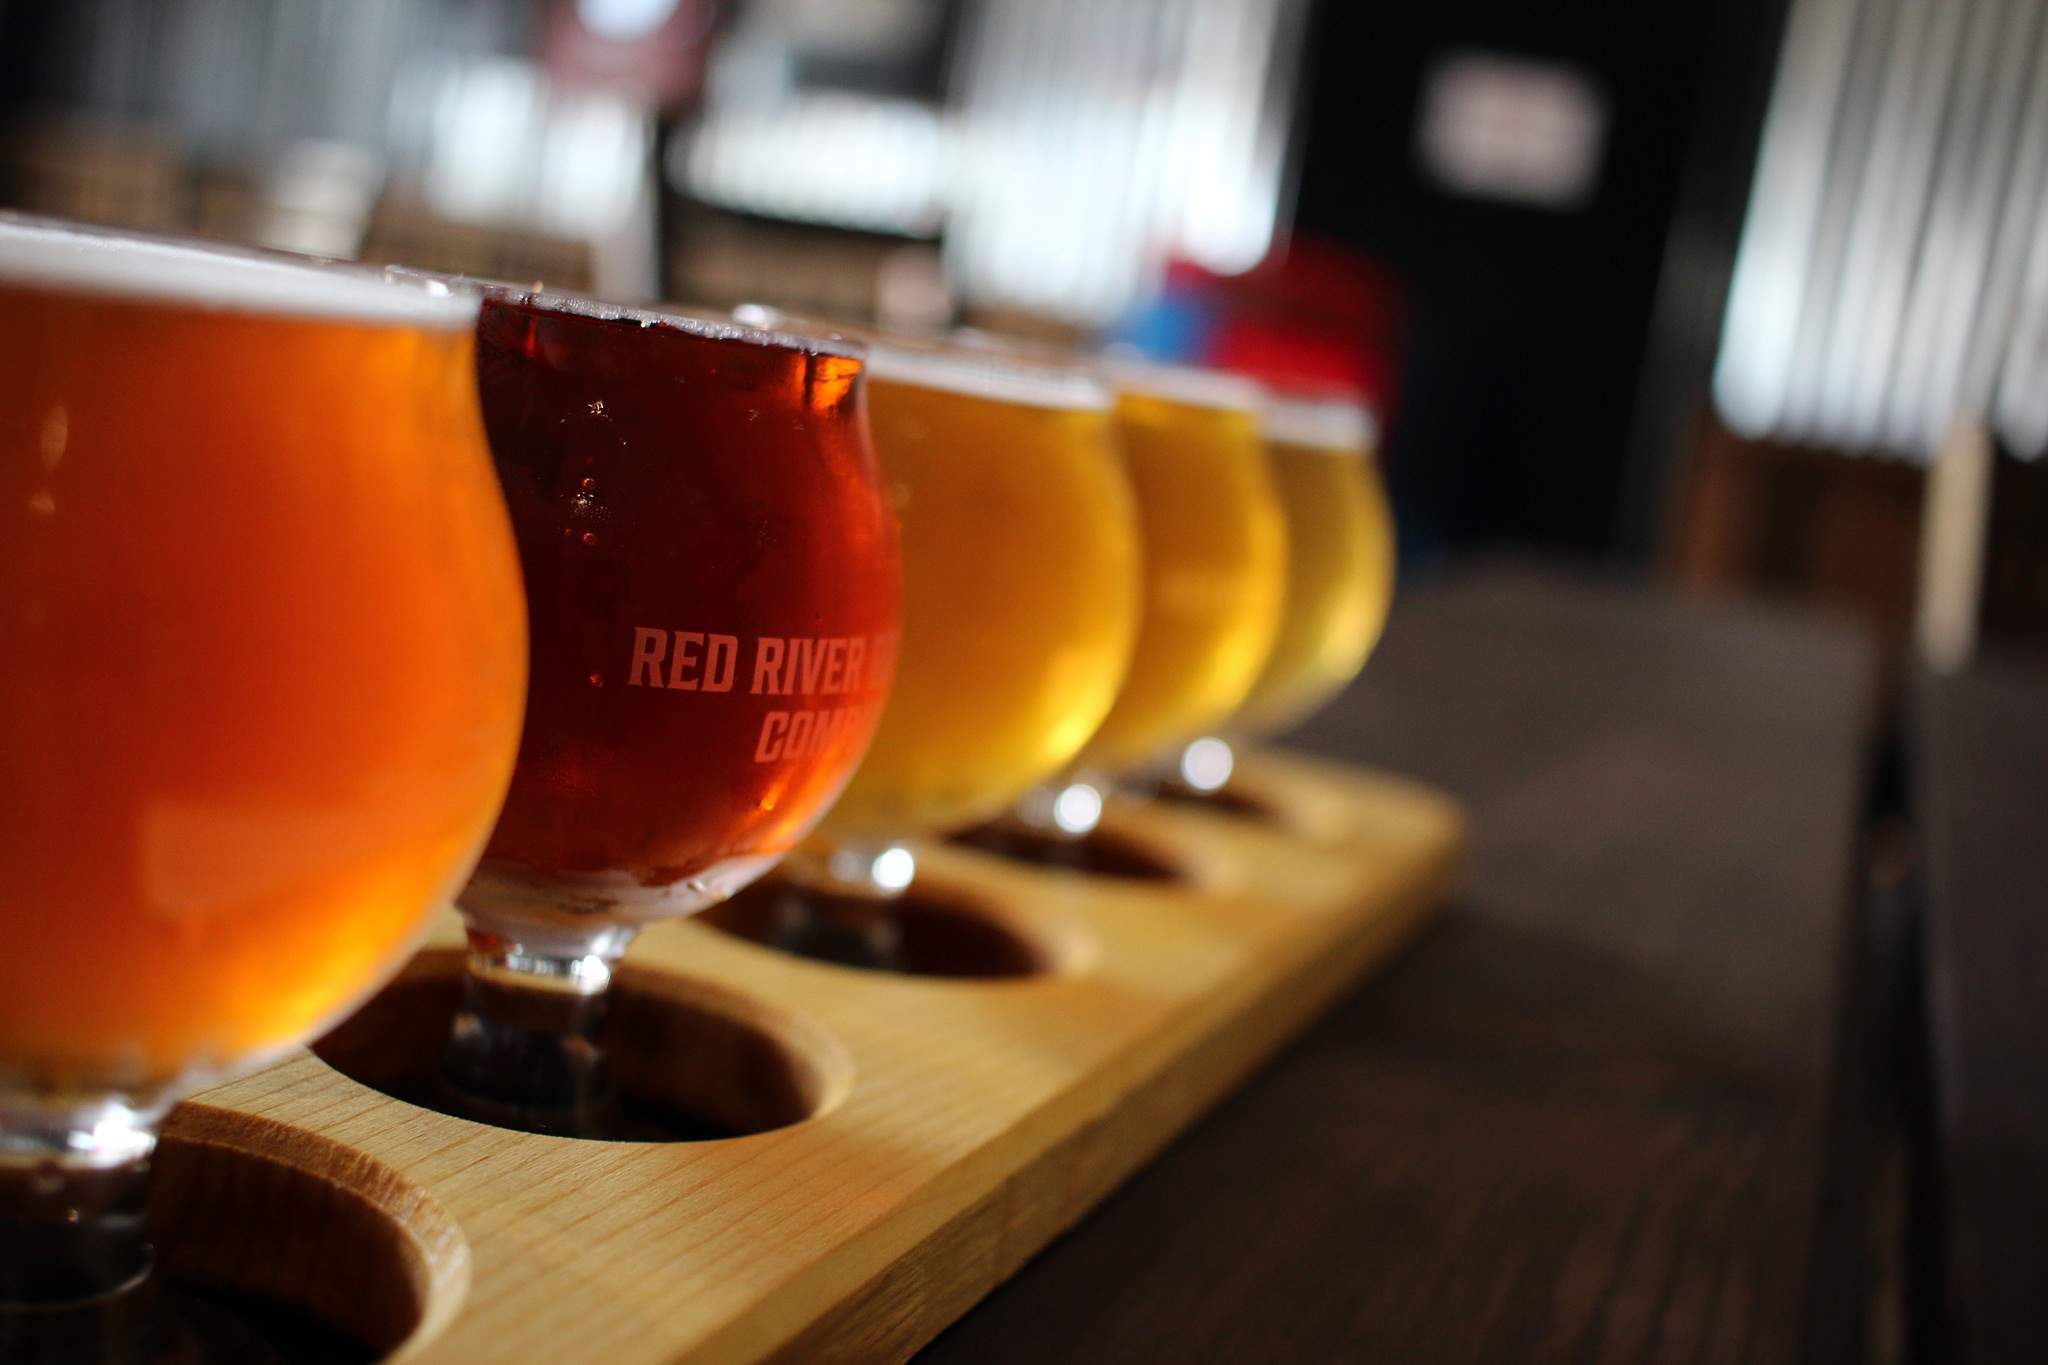 Major brewers are coming for the craft beer sector